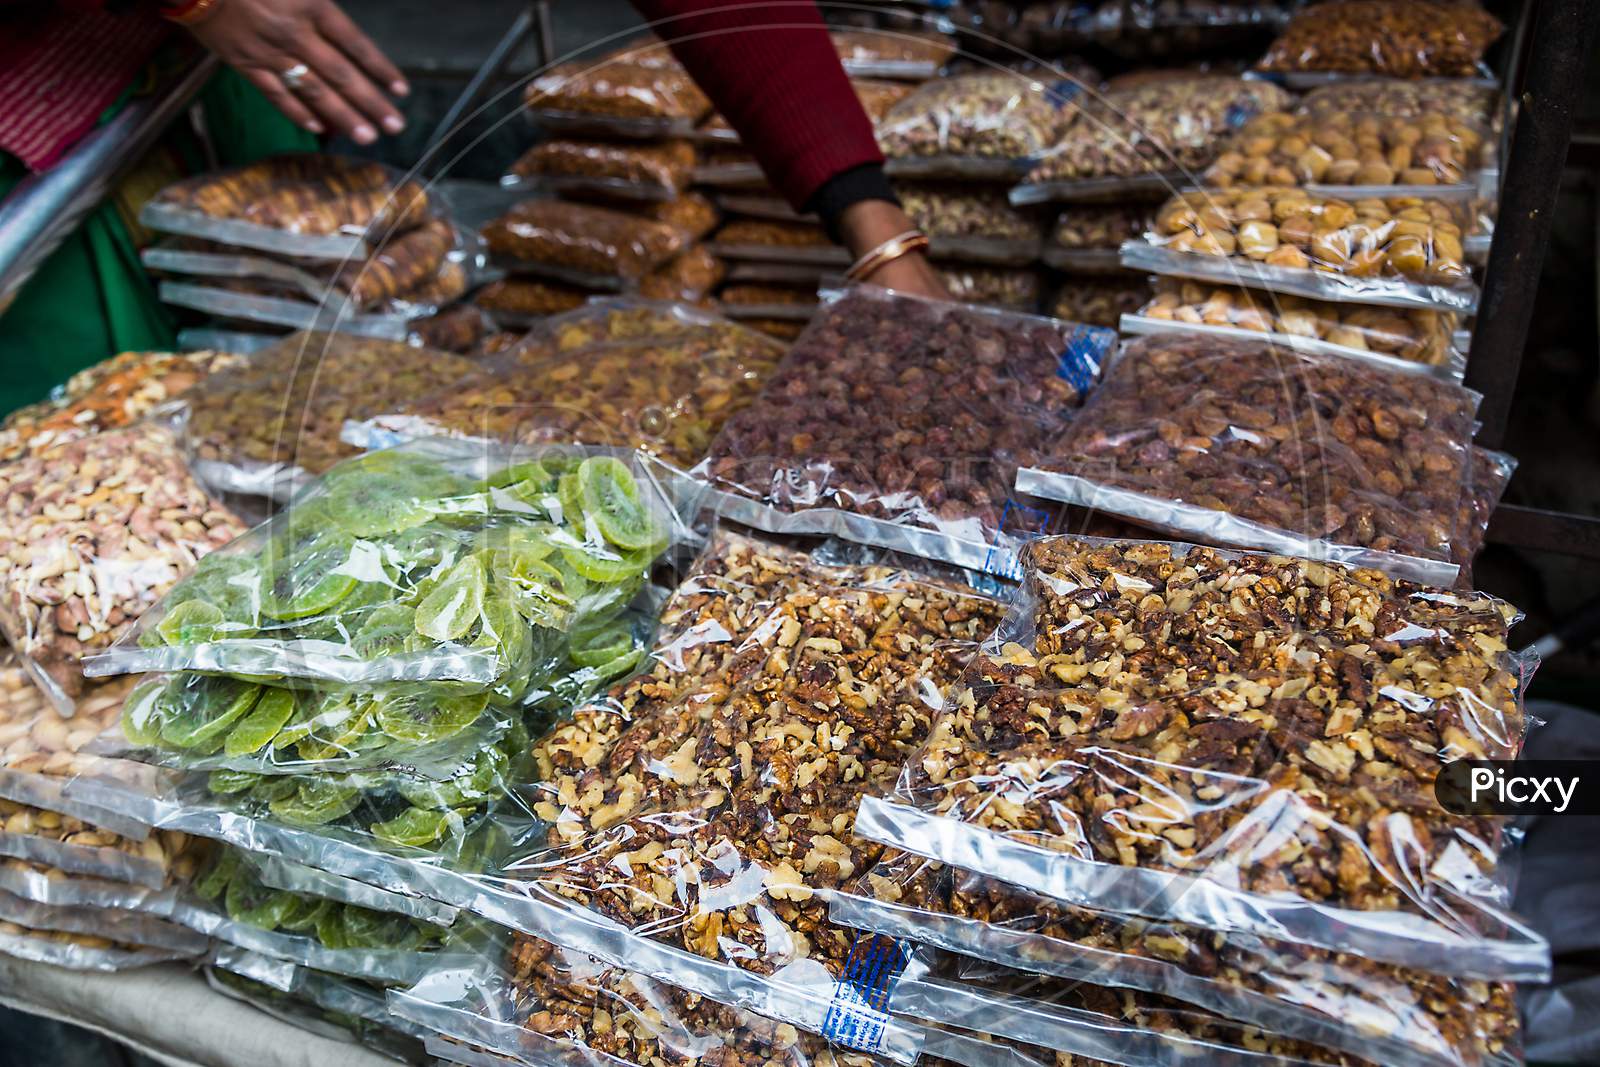 Transparent Plastic Package Full Of Various Dried Fruits Stacked In Piles For Sale At Market, Dried Fruits, Asian Market - Image